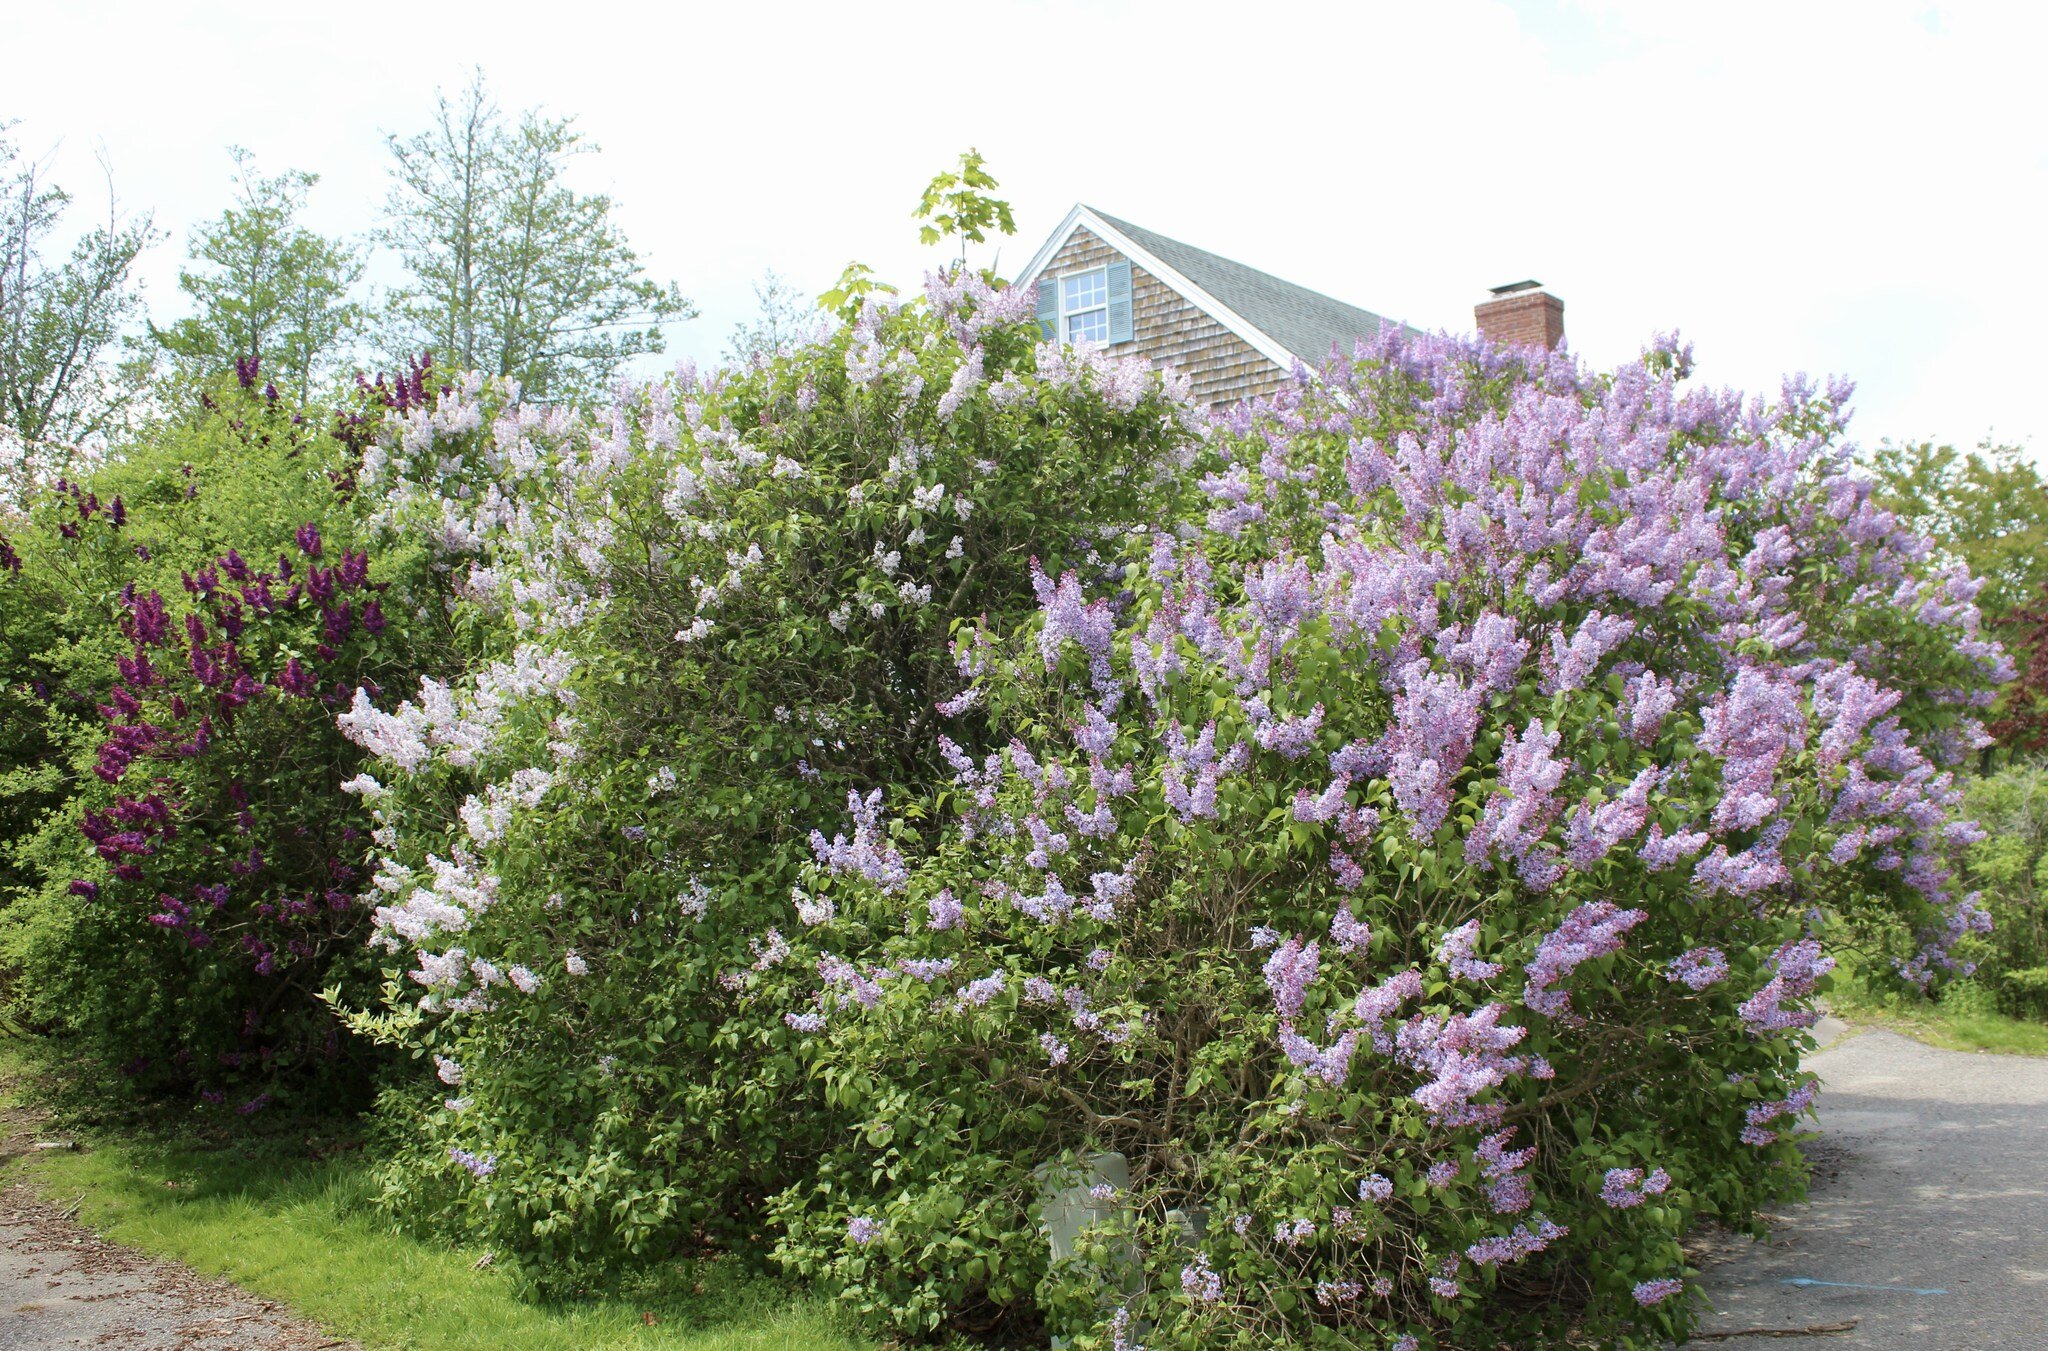 For all the great mothers out there, I&rsquo;ve selected the woody plant most closely associated with this important day, the beautiful common lilac (Syringa vulgaris). Our feature is 3 varieties of greatly differing colors planted in a group, creati